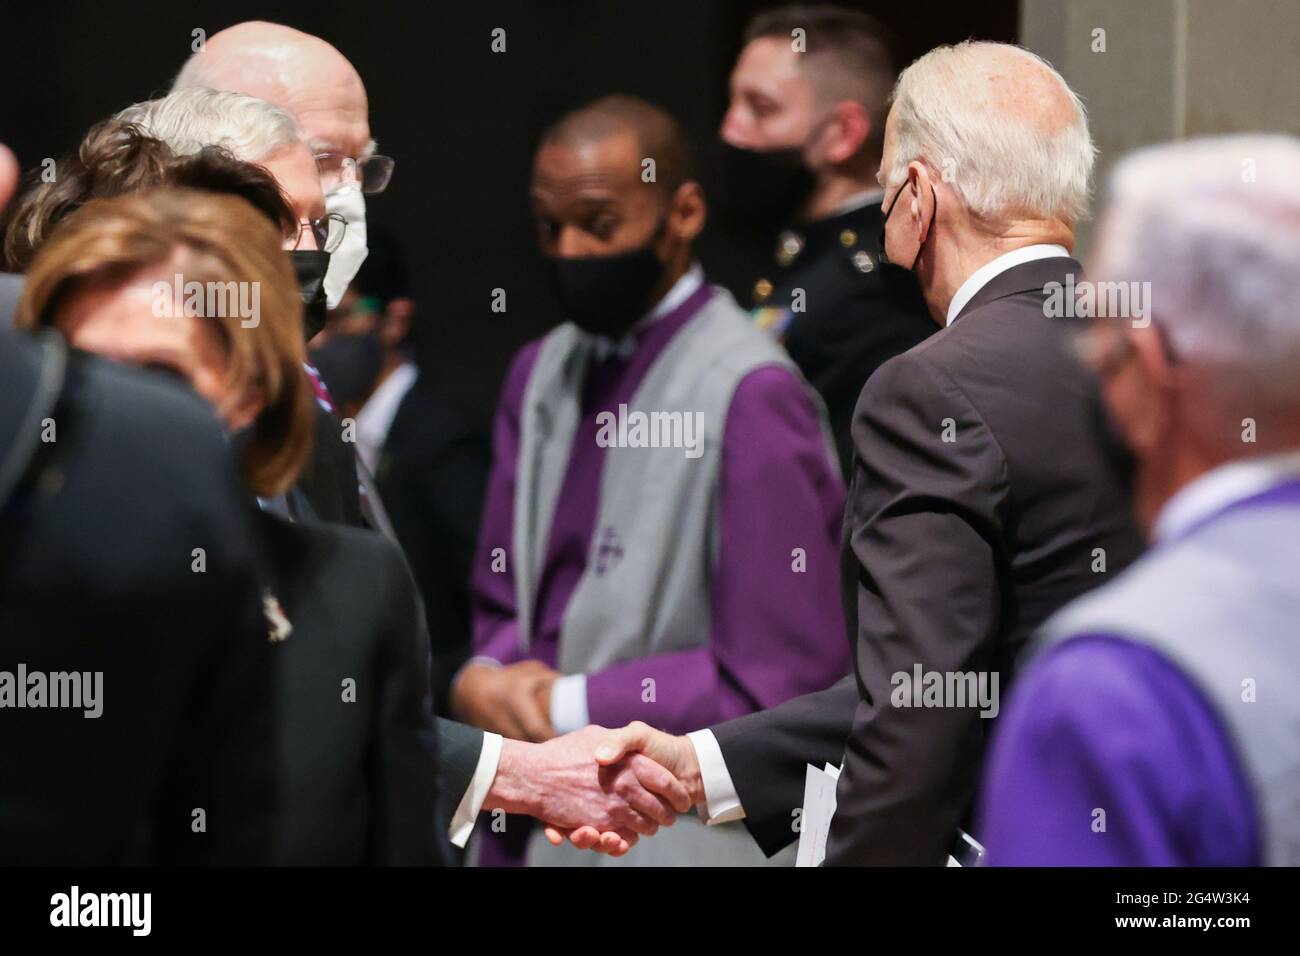 U.S. President Joe Biden shakes hands with Senate Minority Leader Mitch McConnell (R-KY) after the funeral ceremony of former Senator John Warner at Washington National Cathedral in Washington, DC, U.S. June 23, 2021. Oliver Contreras/Pool via REUTERS Stock Photo